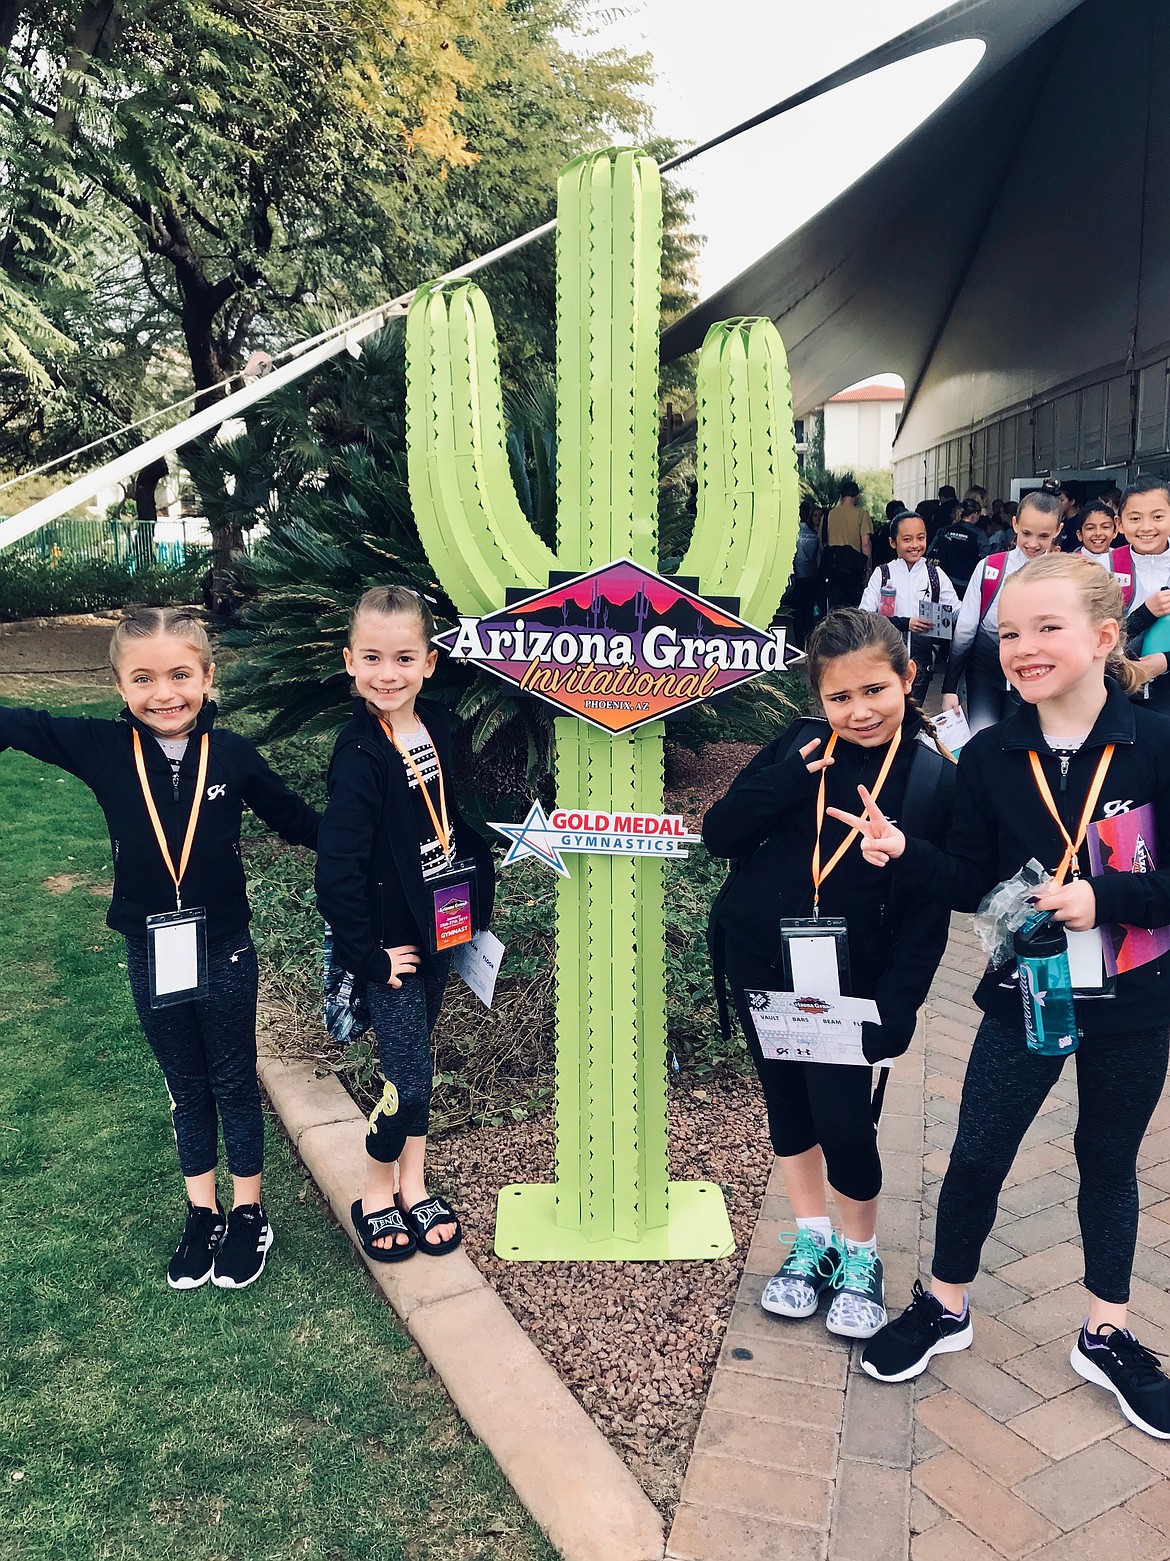 Courtesy photo
Avant Coeur Level 2s took 2nd as a Team at the Arizona Grand Invitational in Phoenix. From left are Karly Harmon, Lucky Call, Analise Garcia and Quinn Howard.